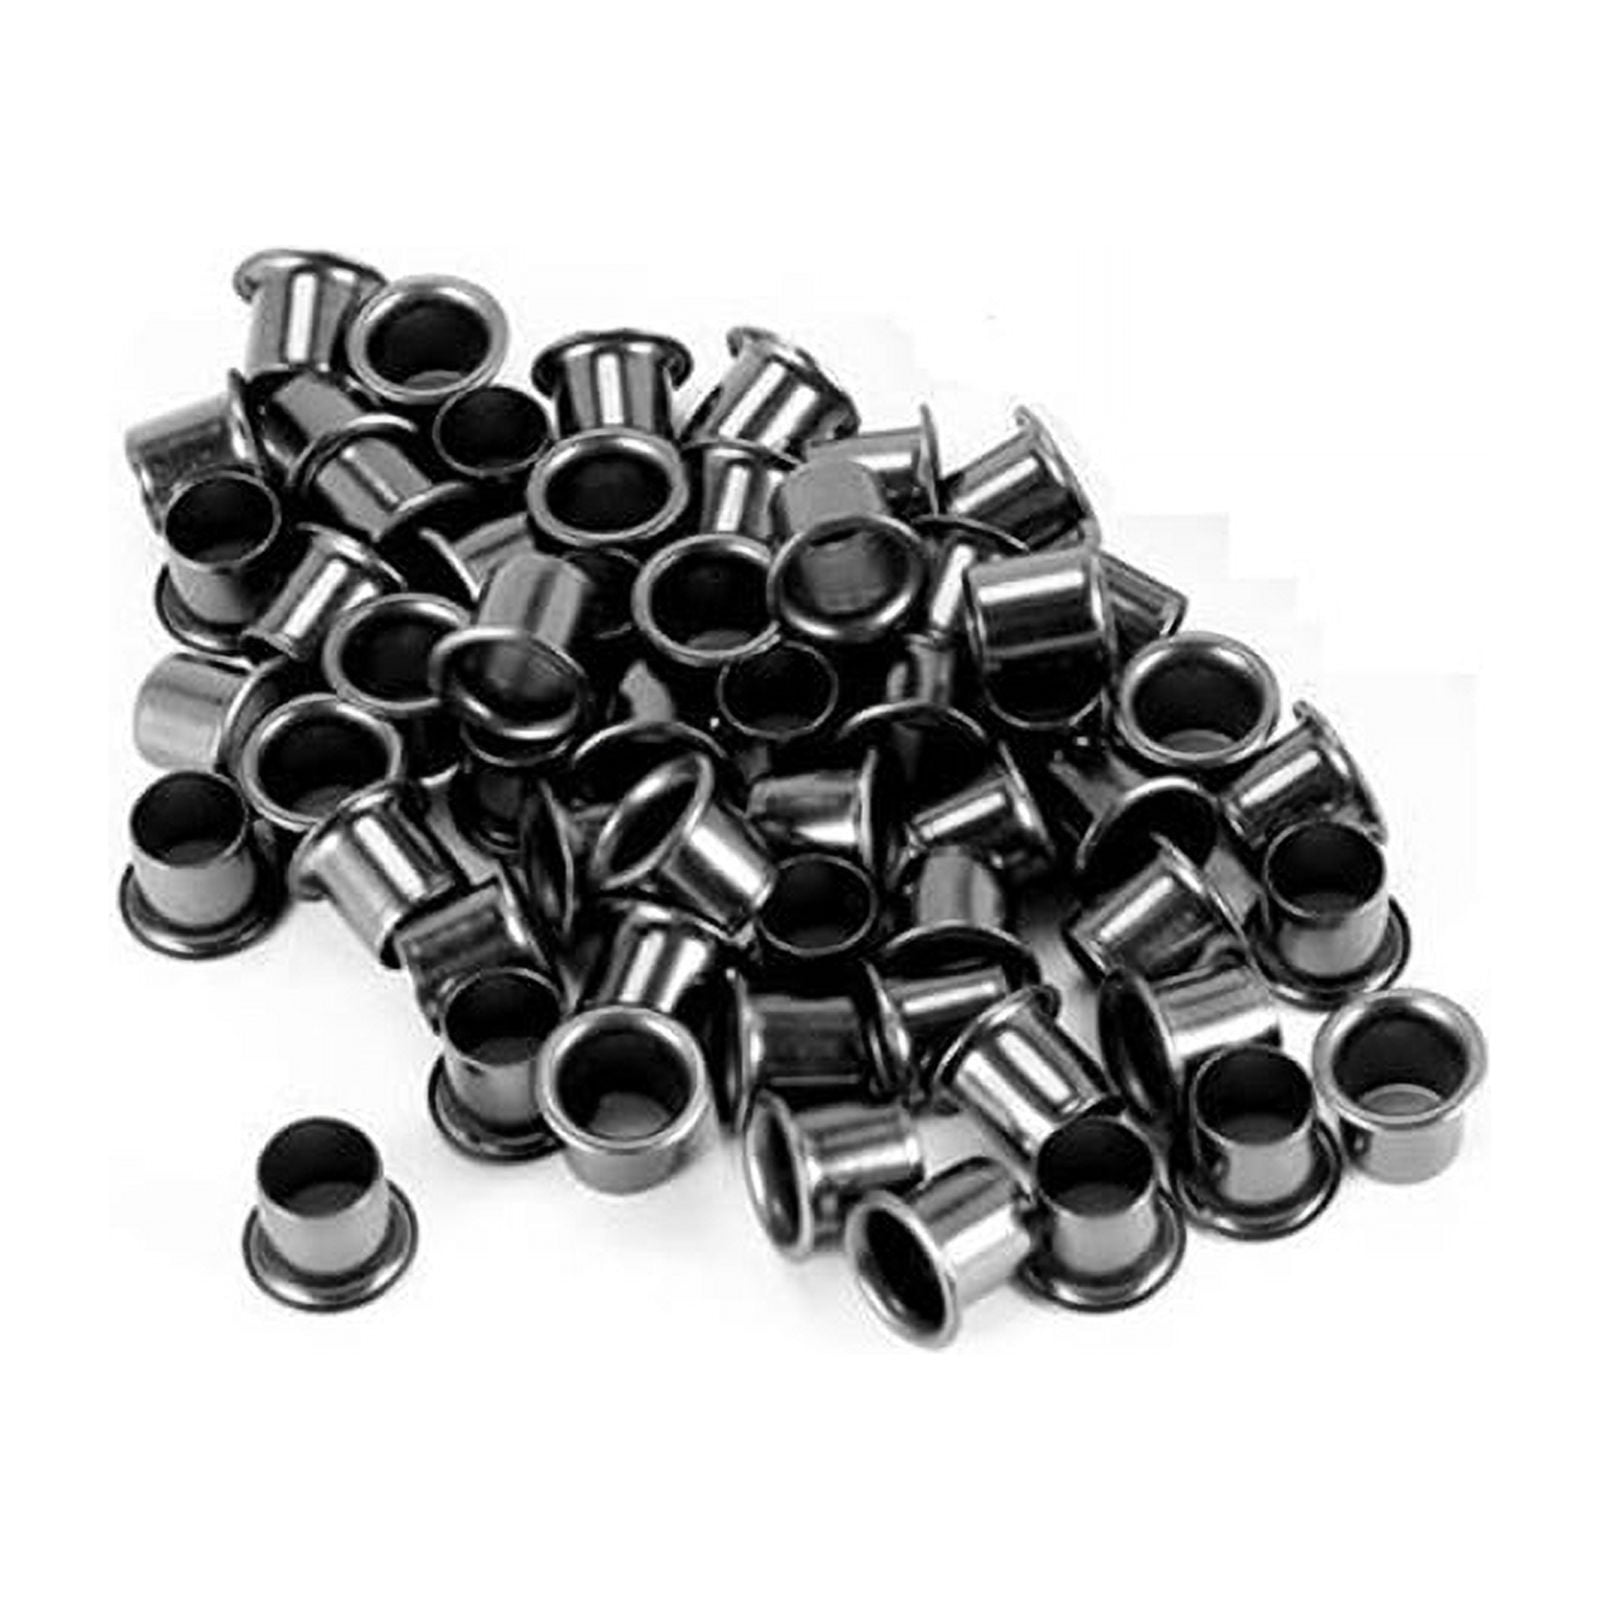 100 Pieces Eyelets For Diy Kydex Sheath Making 7mm Rivet Hand